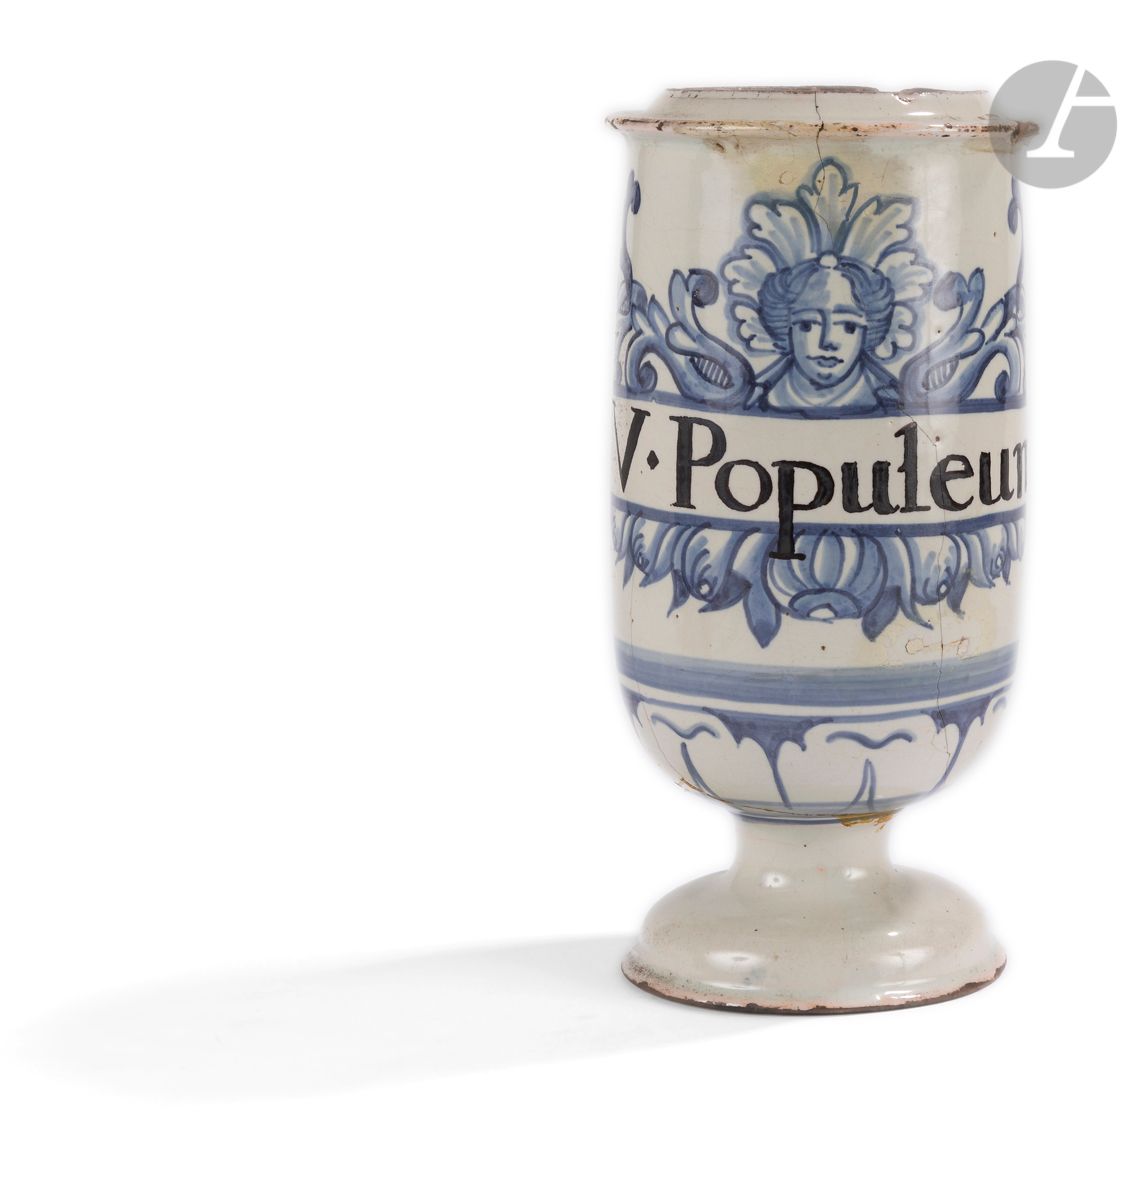 Null Montpellier
Pot barrel in earthenware with decoration in blue monochrome of&hellip;